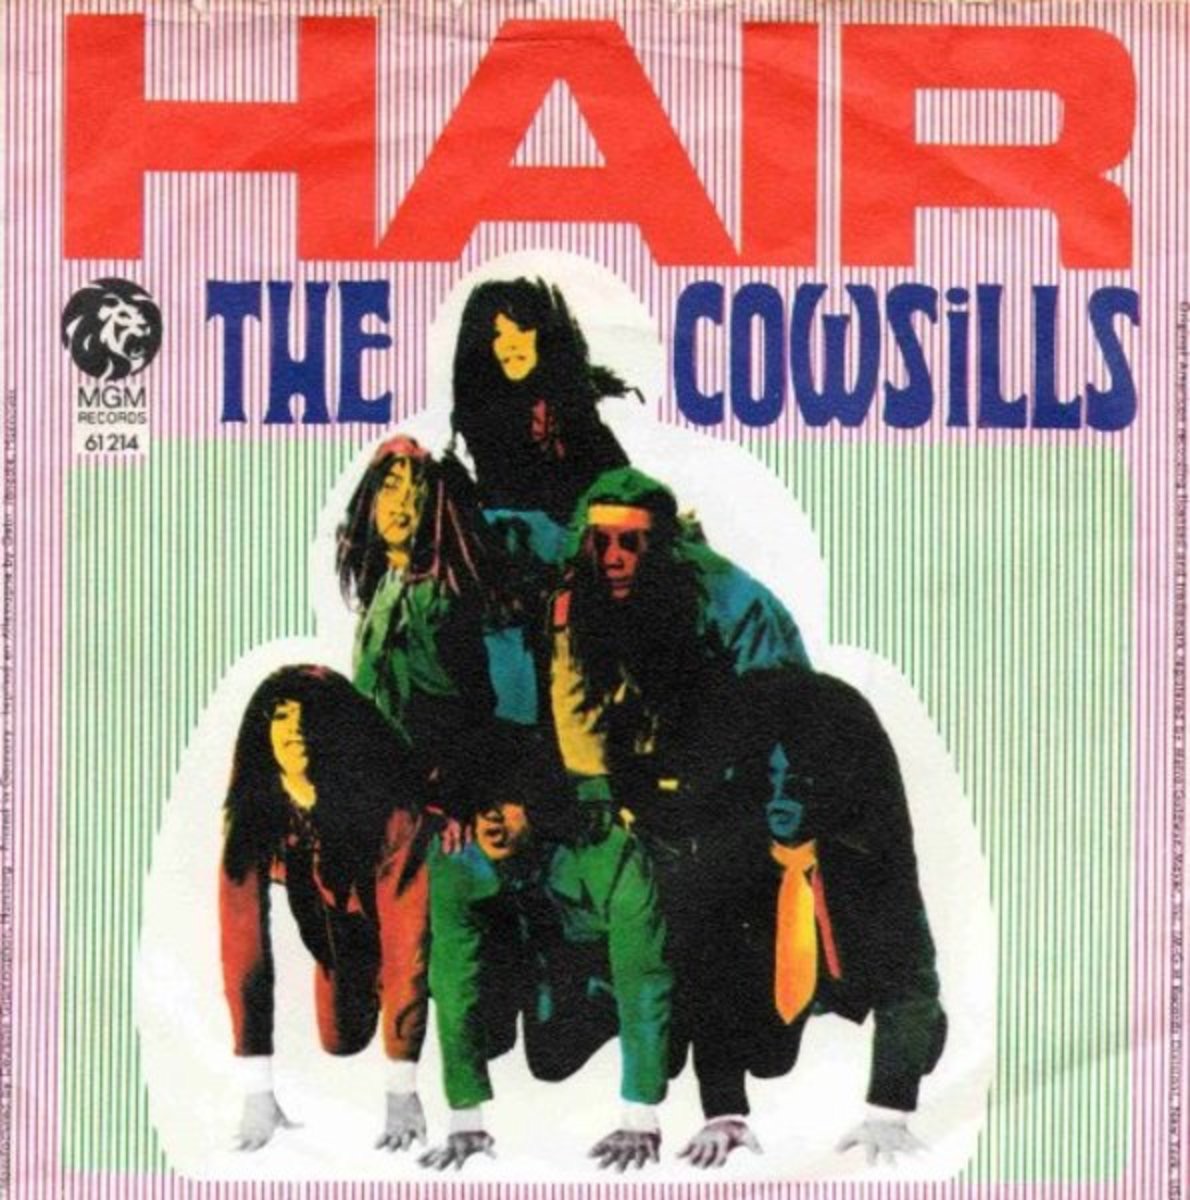 the cowsills hair single cover, 50 songs from 50 years ago